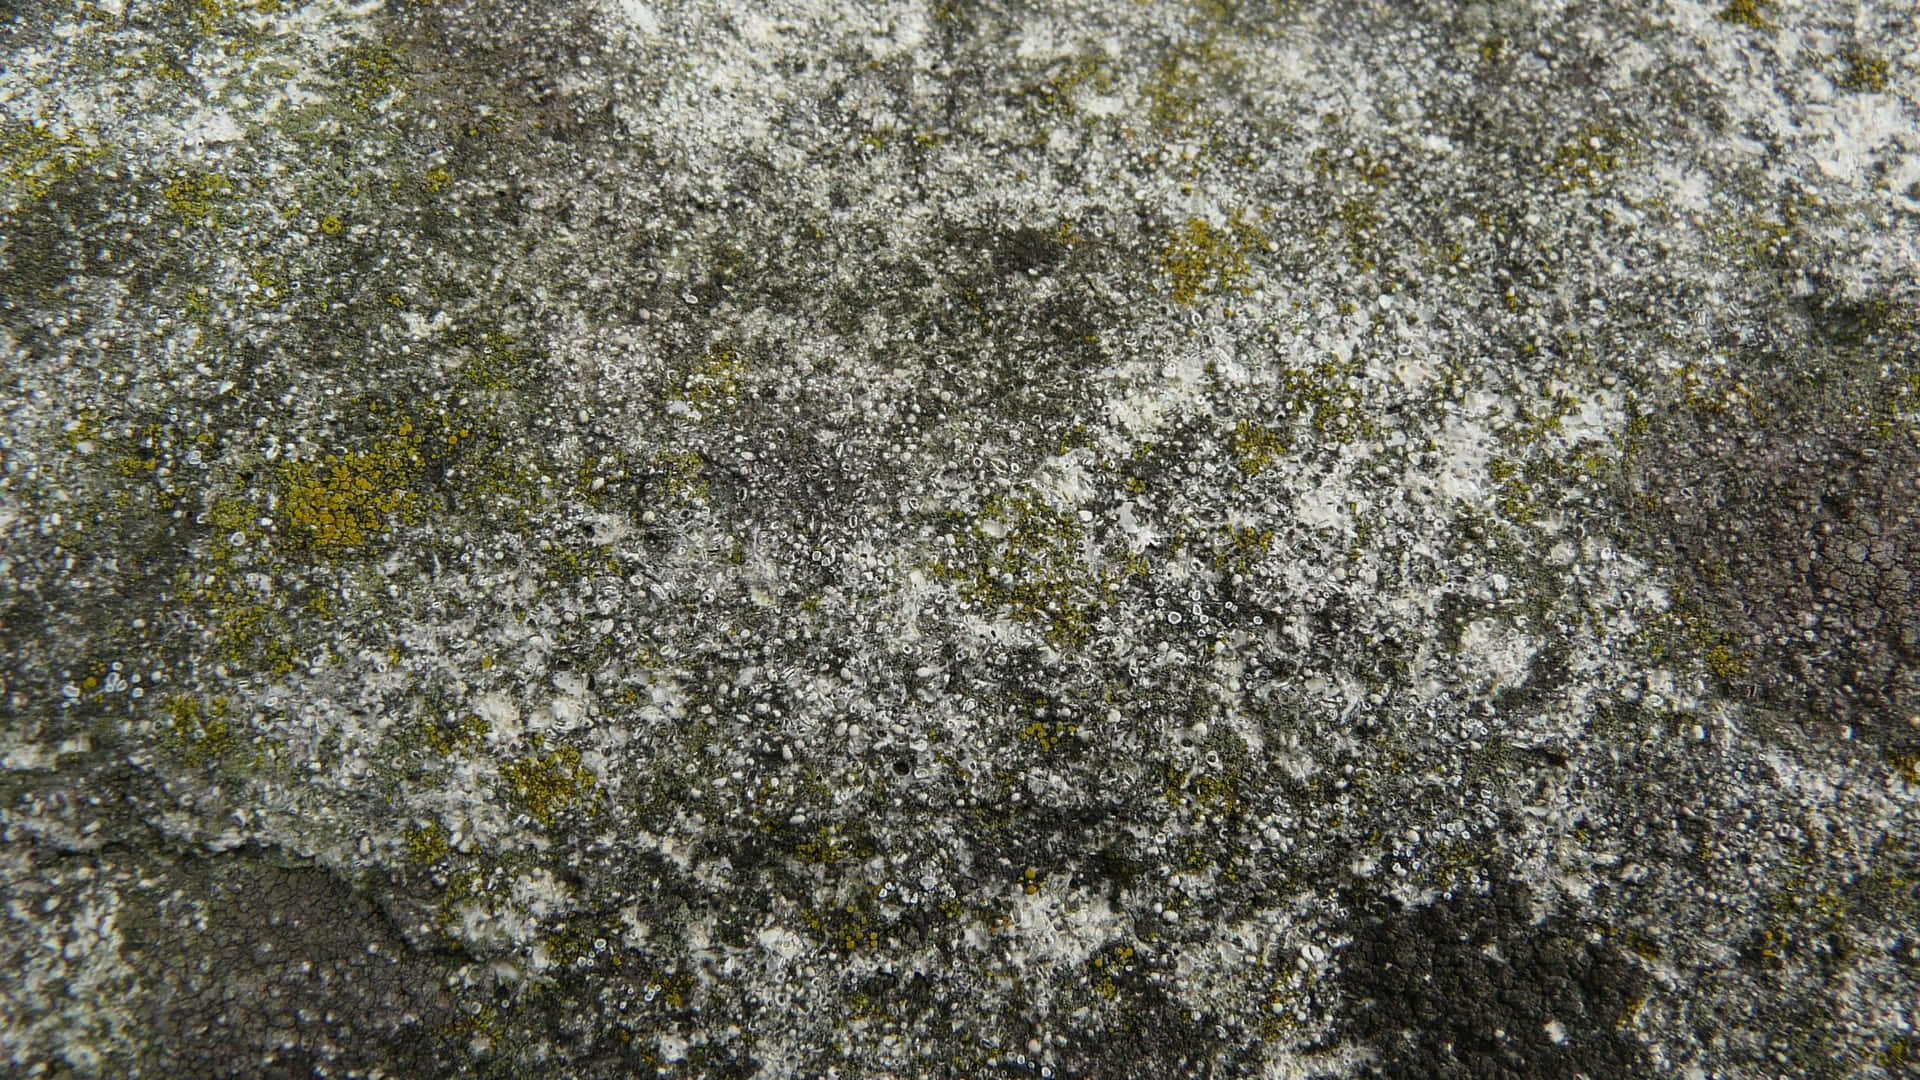 Mossy Stone Texture Pictures